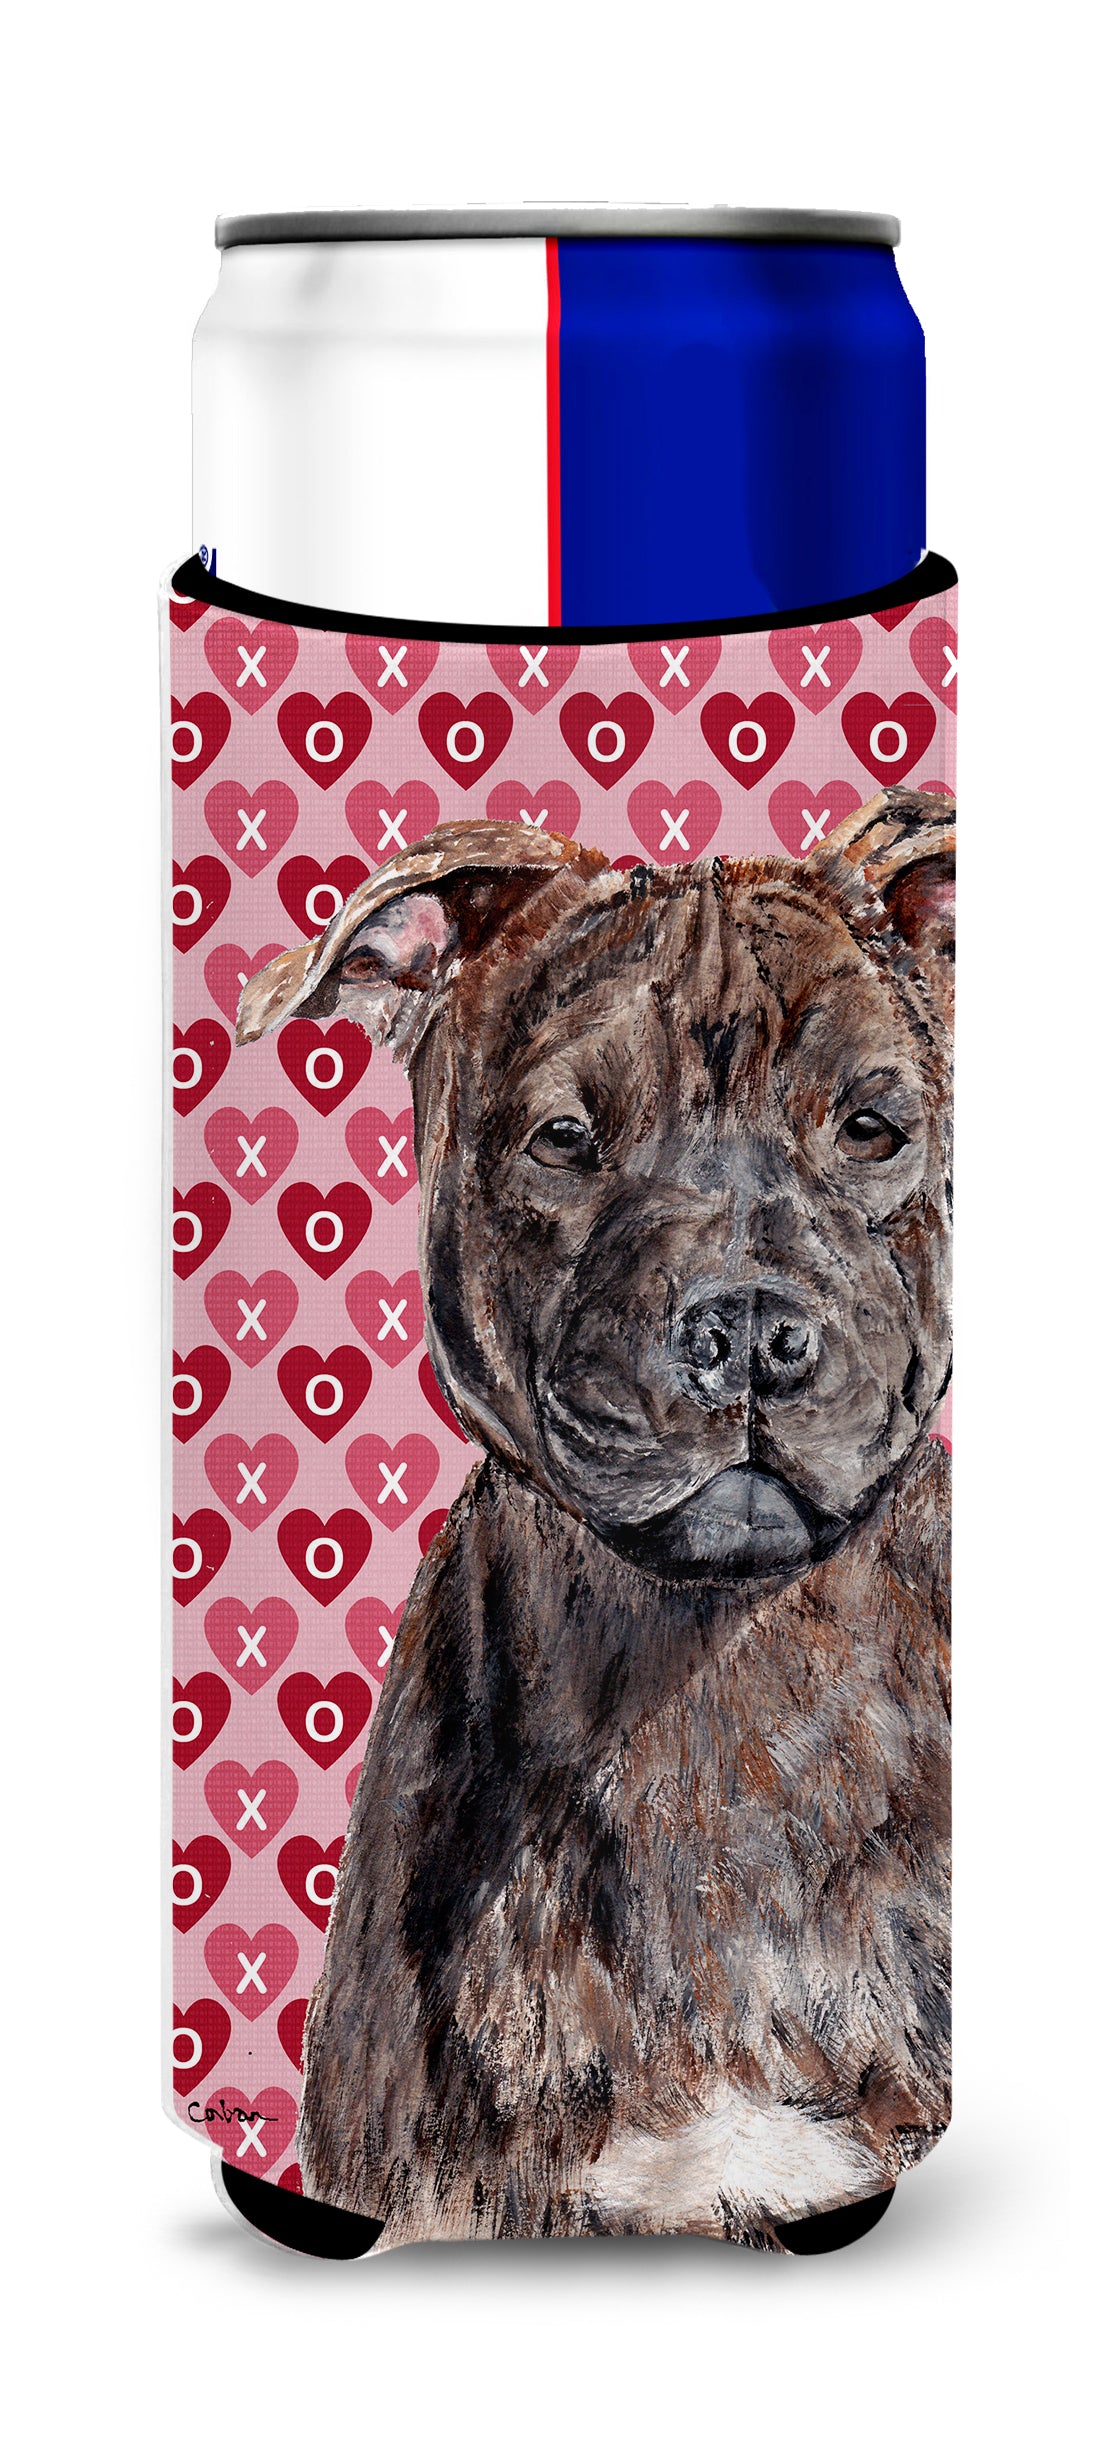 Staffordshire Bull Terrier Staffie Hearts and Love Ultra Beverage Insulators for slim cans SC9705MUK